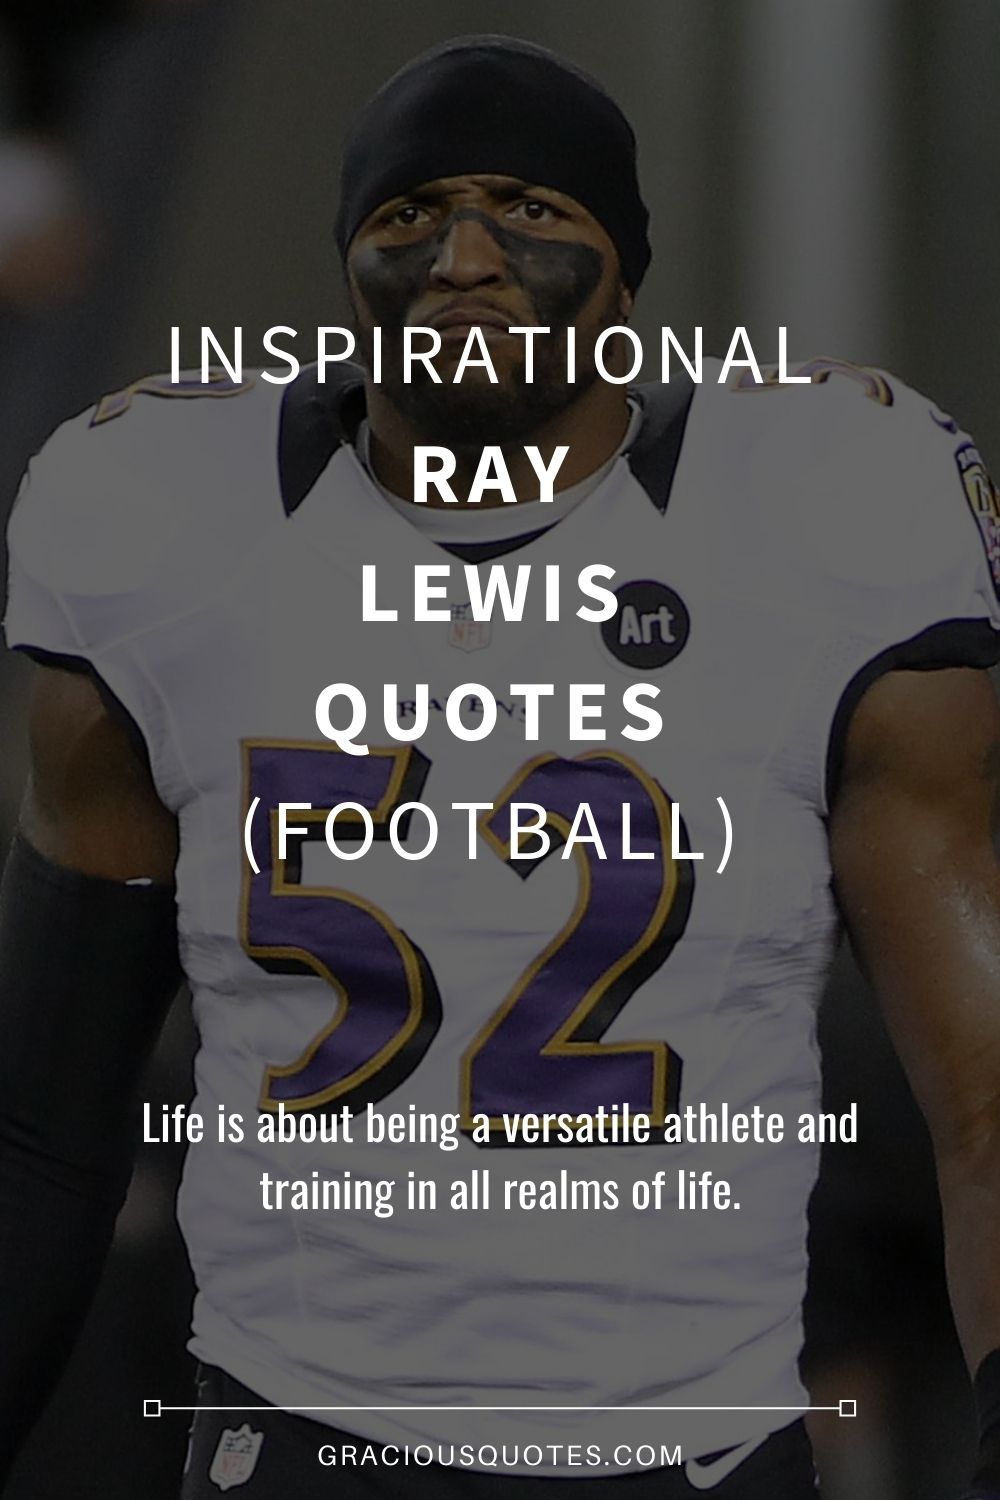 Inspirational Ray Lewis Quotes (FOOTBALL) - Gracious Quotes